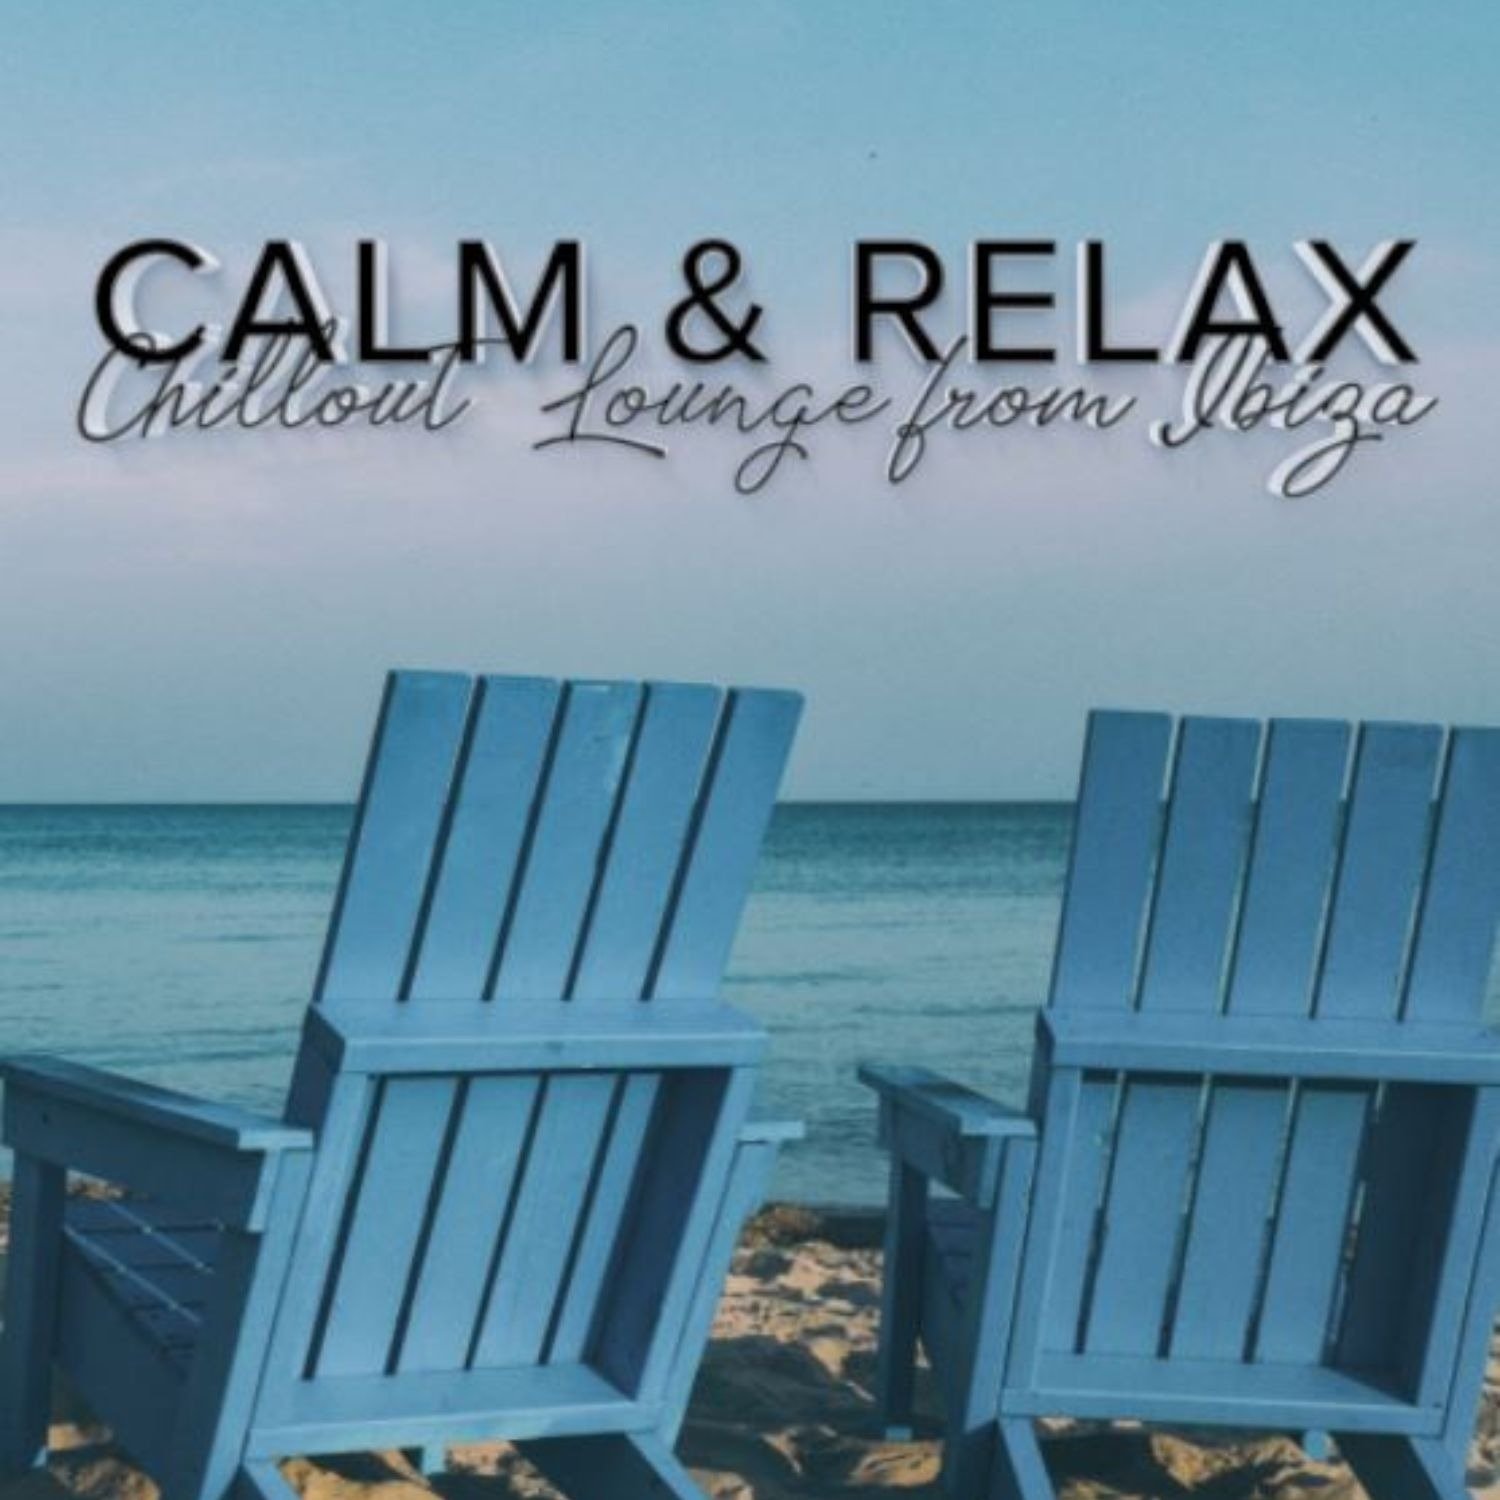 CD Shop - V/A CALM & RELAX CHILL OUT LOUNGE FROM IBIZA